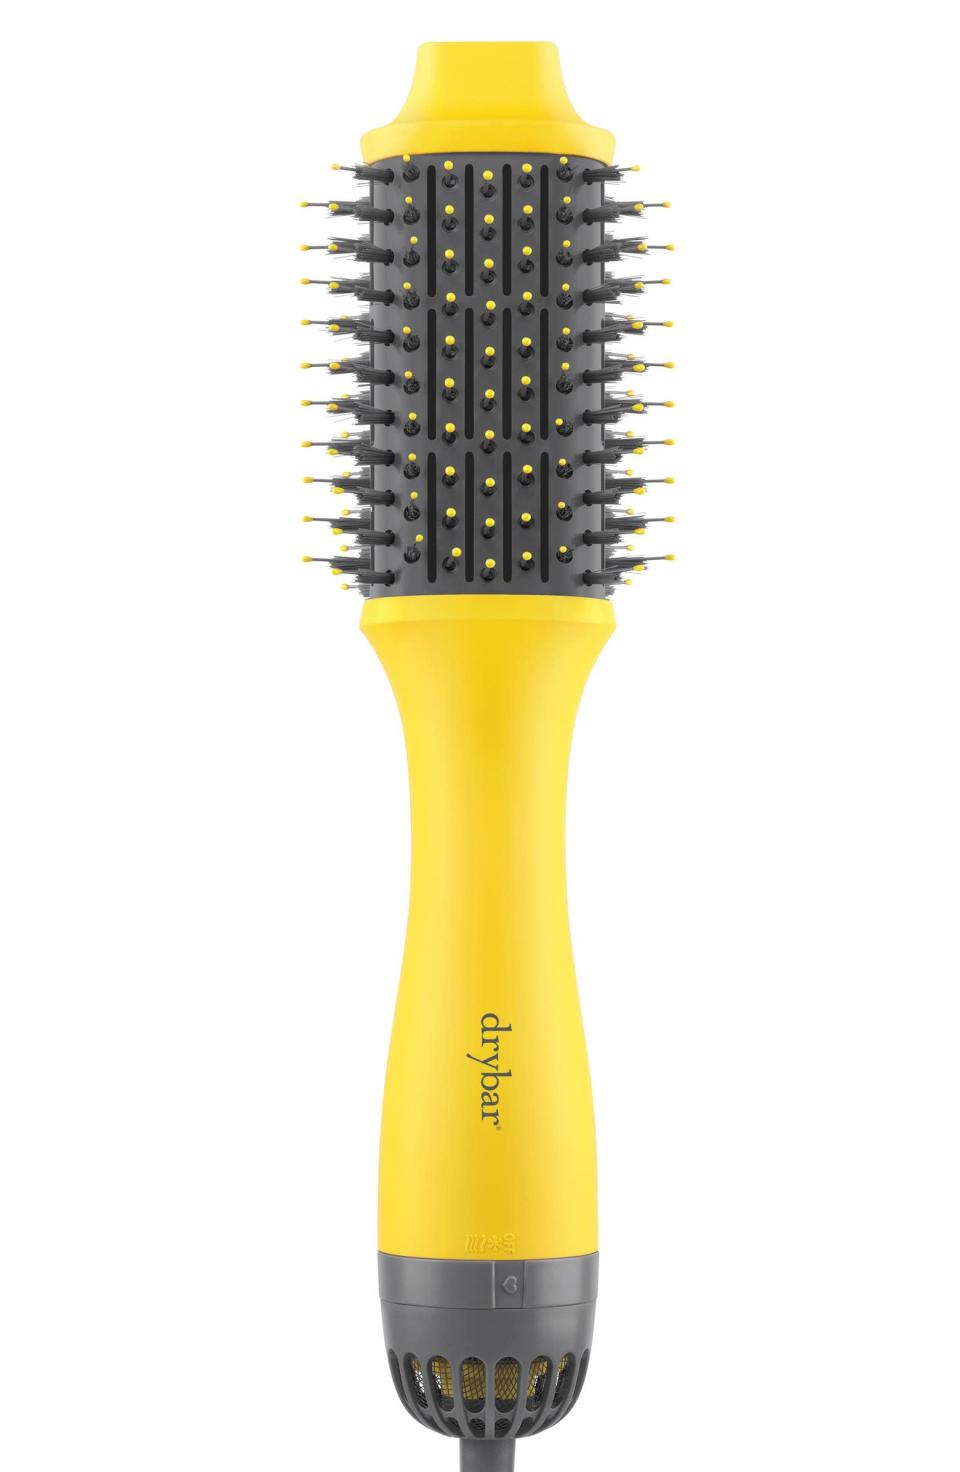 <h2>15% Off Drybar The Double Shot Round Blow-Dryer Brush</h2><br>Remember when blow-dryer brushes were all the rage? Well, they're not going anywhere any time soon. Super convenient and easy, gift this Drybar essential to anyone on your list who's a hair-obsessed busybody. <br><br><em>Shop <strong><a href="https://www.nordstrom.com/browse/sale/beauty/hair?breadcrumb=Home%2FSale%2FBeauty%2FHair%20Care" rel="nofollow noopener" target="_blank" data-ylk="slk:Haircare On Sale" class="link rapid-noclick-resp">Haircare On Sale</a></strong></em><br><br><strong>DryBar</strong> The Double Shot Round Blow-Dryer Brush, $, available at <a href="https://go.skimresources.com/?id=30283X879131&url=https%3A%2F%2Fwww.nordstrom.com%2Fs%2Fdrybar-the-double-shot-round-blow-dryer-brush%2F5467553" rel="nofollow noopener" target="_blank" data-ylk="slk:Nordstrom" class="link rapid-noclick-resp">Nordstrom</a>